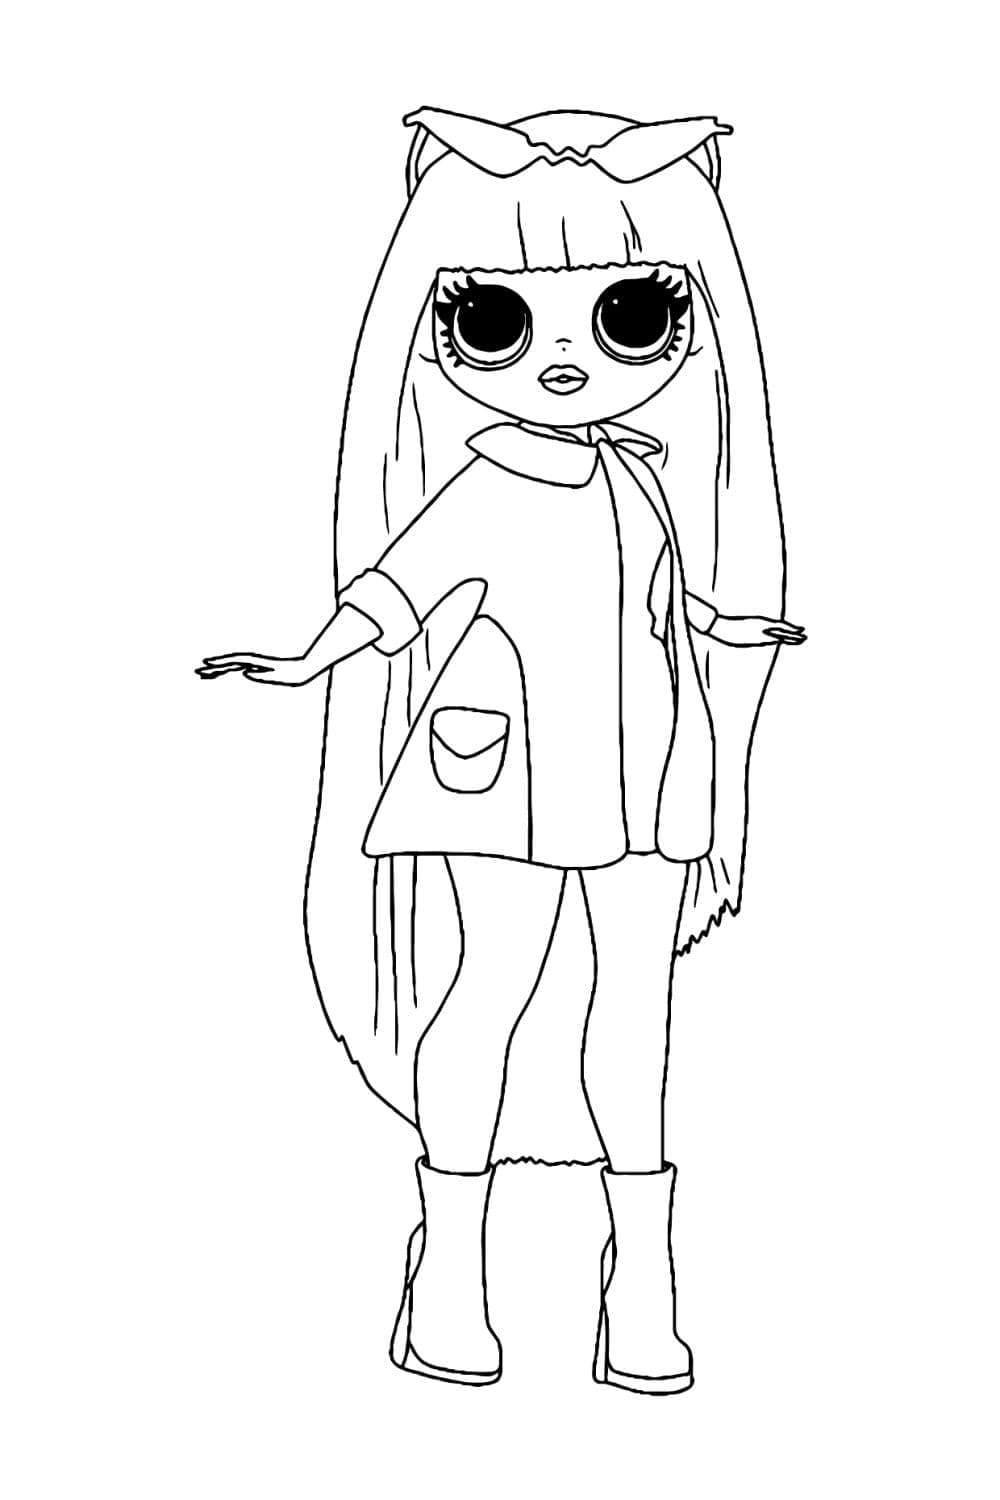 Groovy Babe LOL OMG coloring page